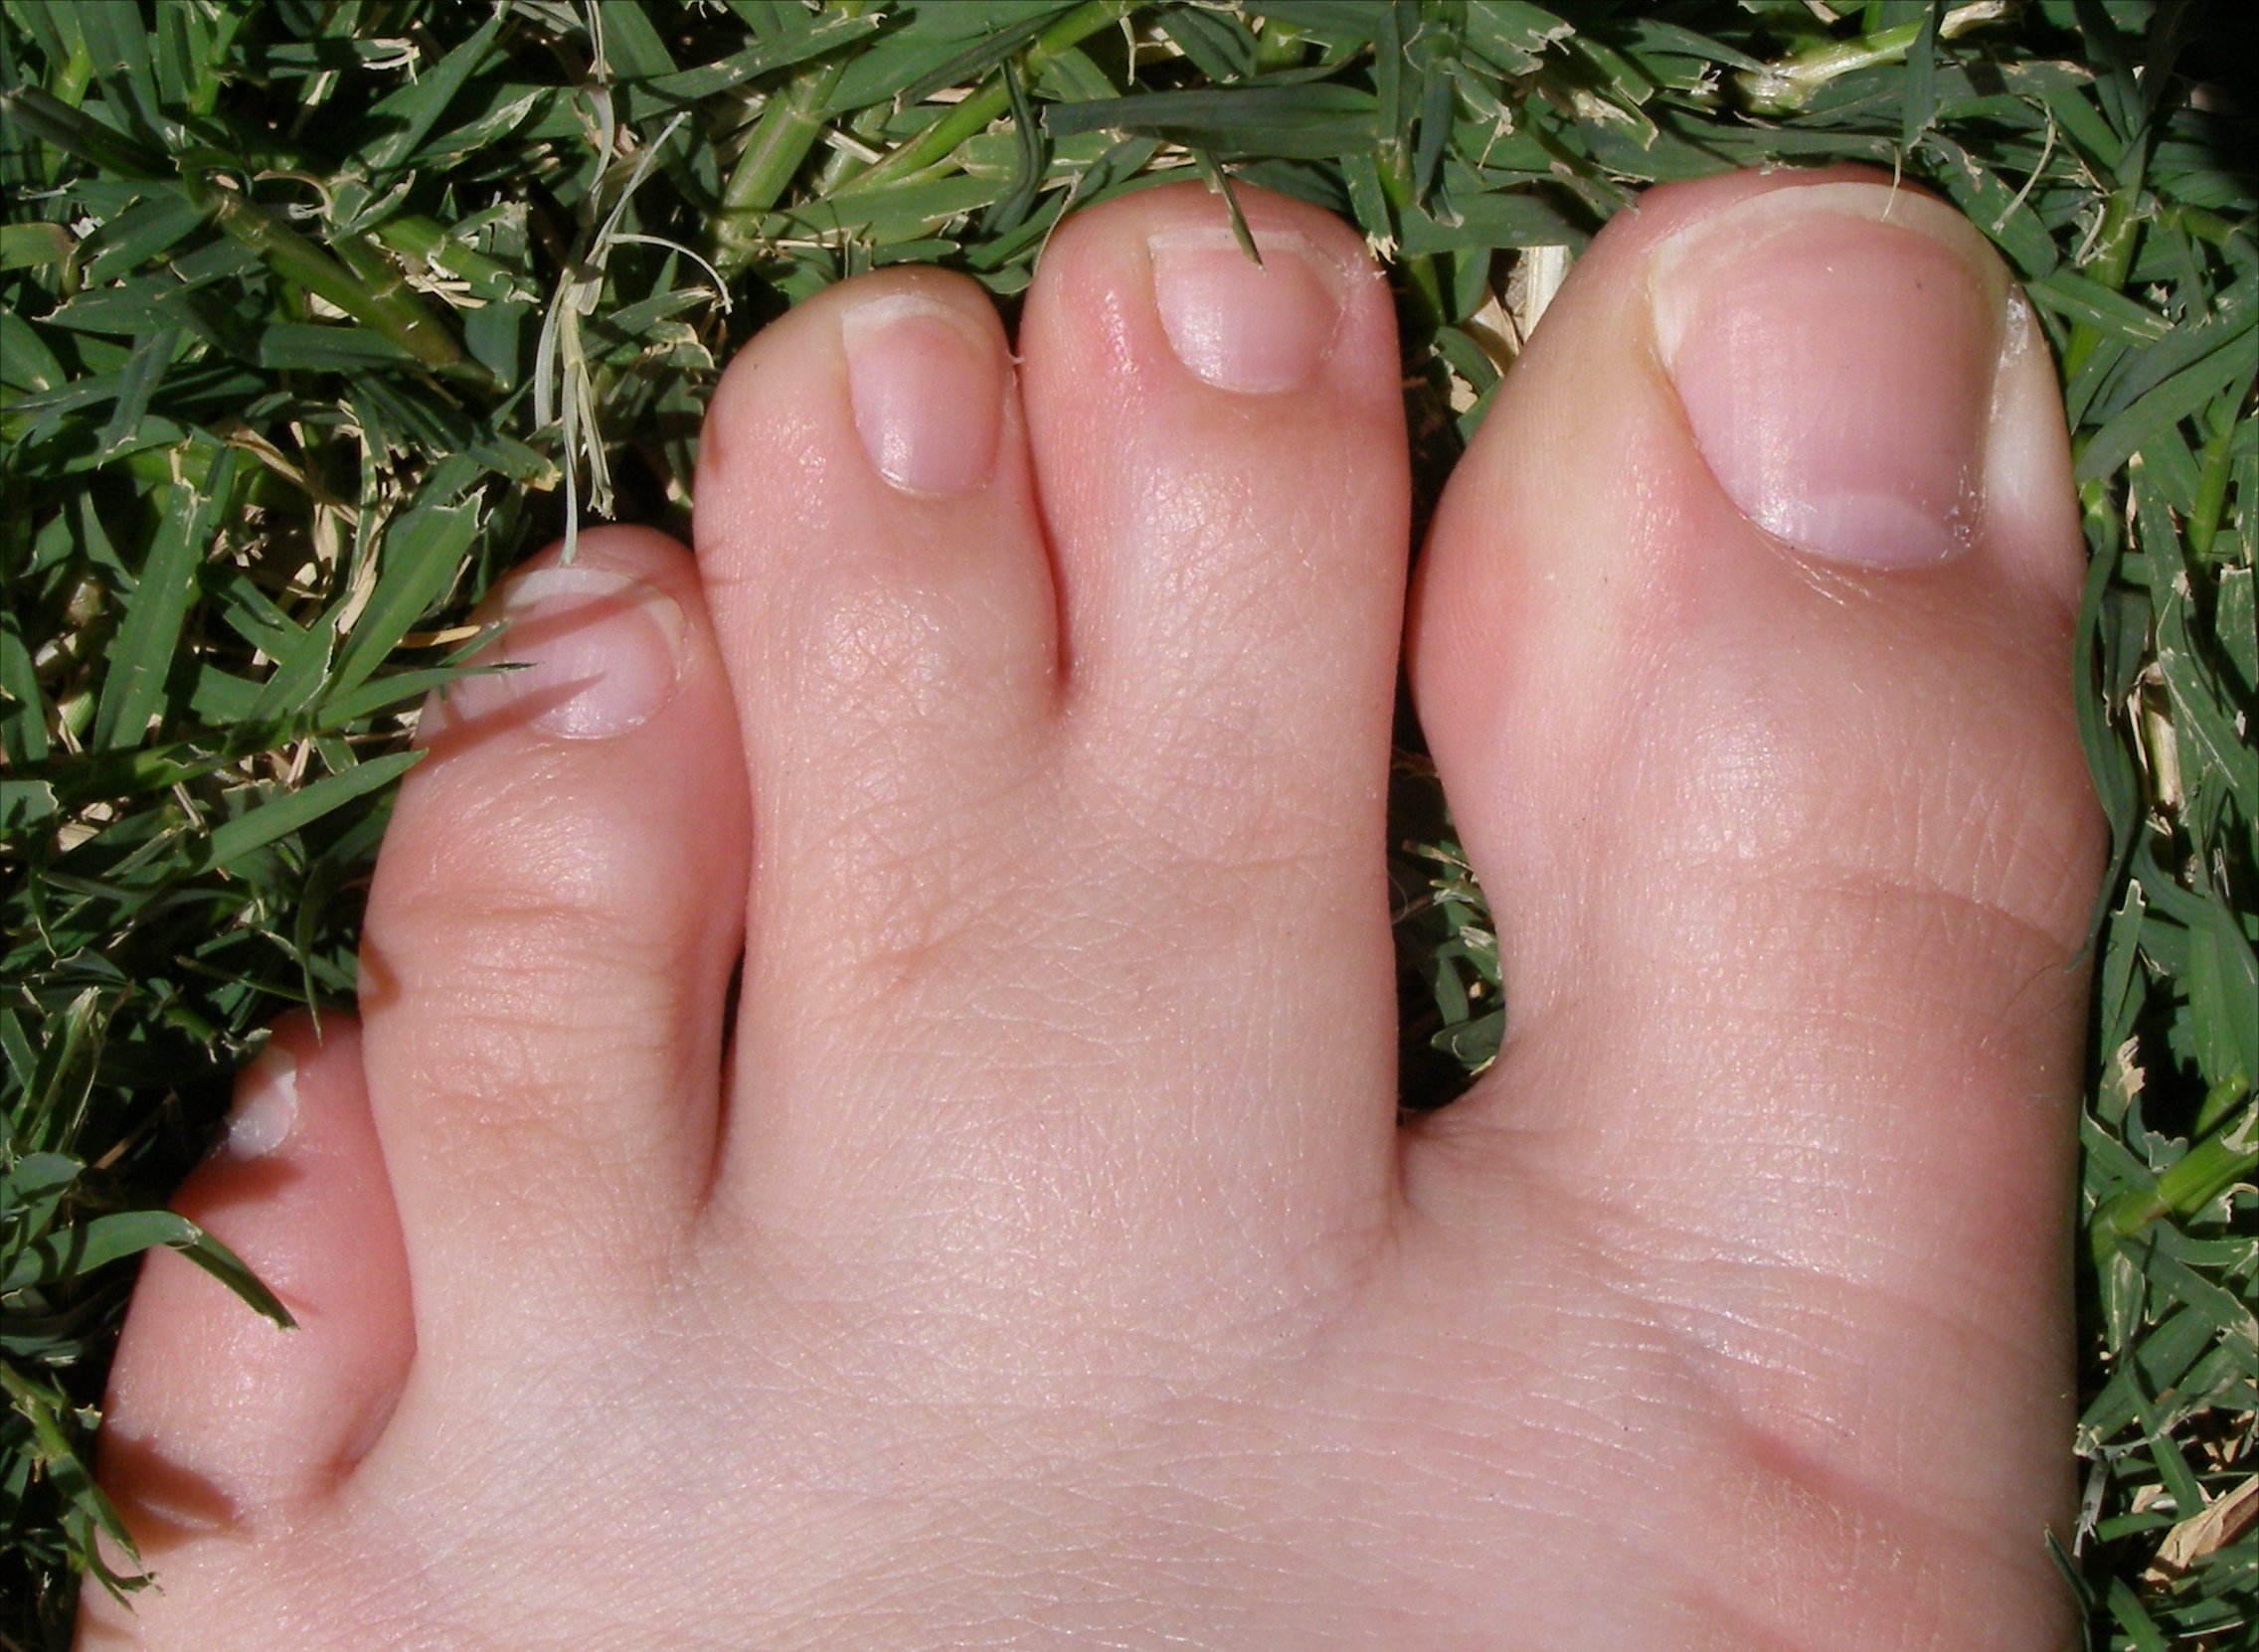 How common is syndactyly toes?